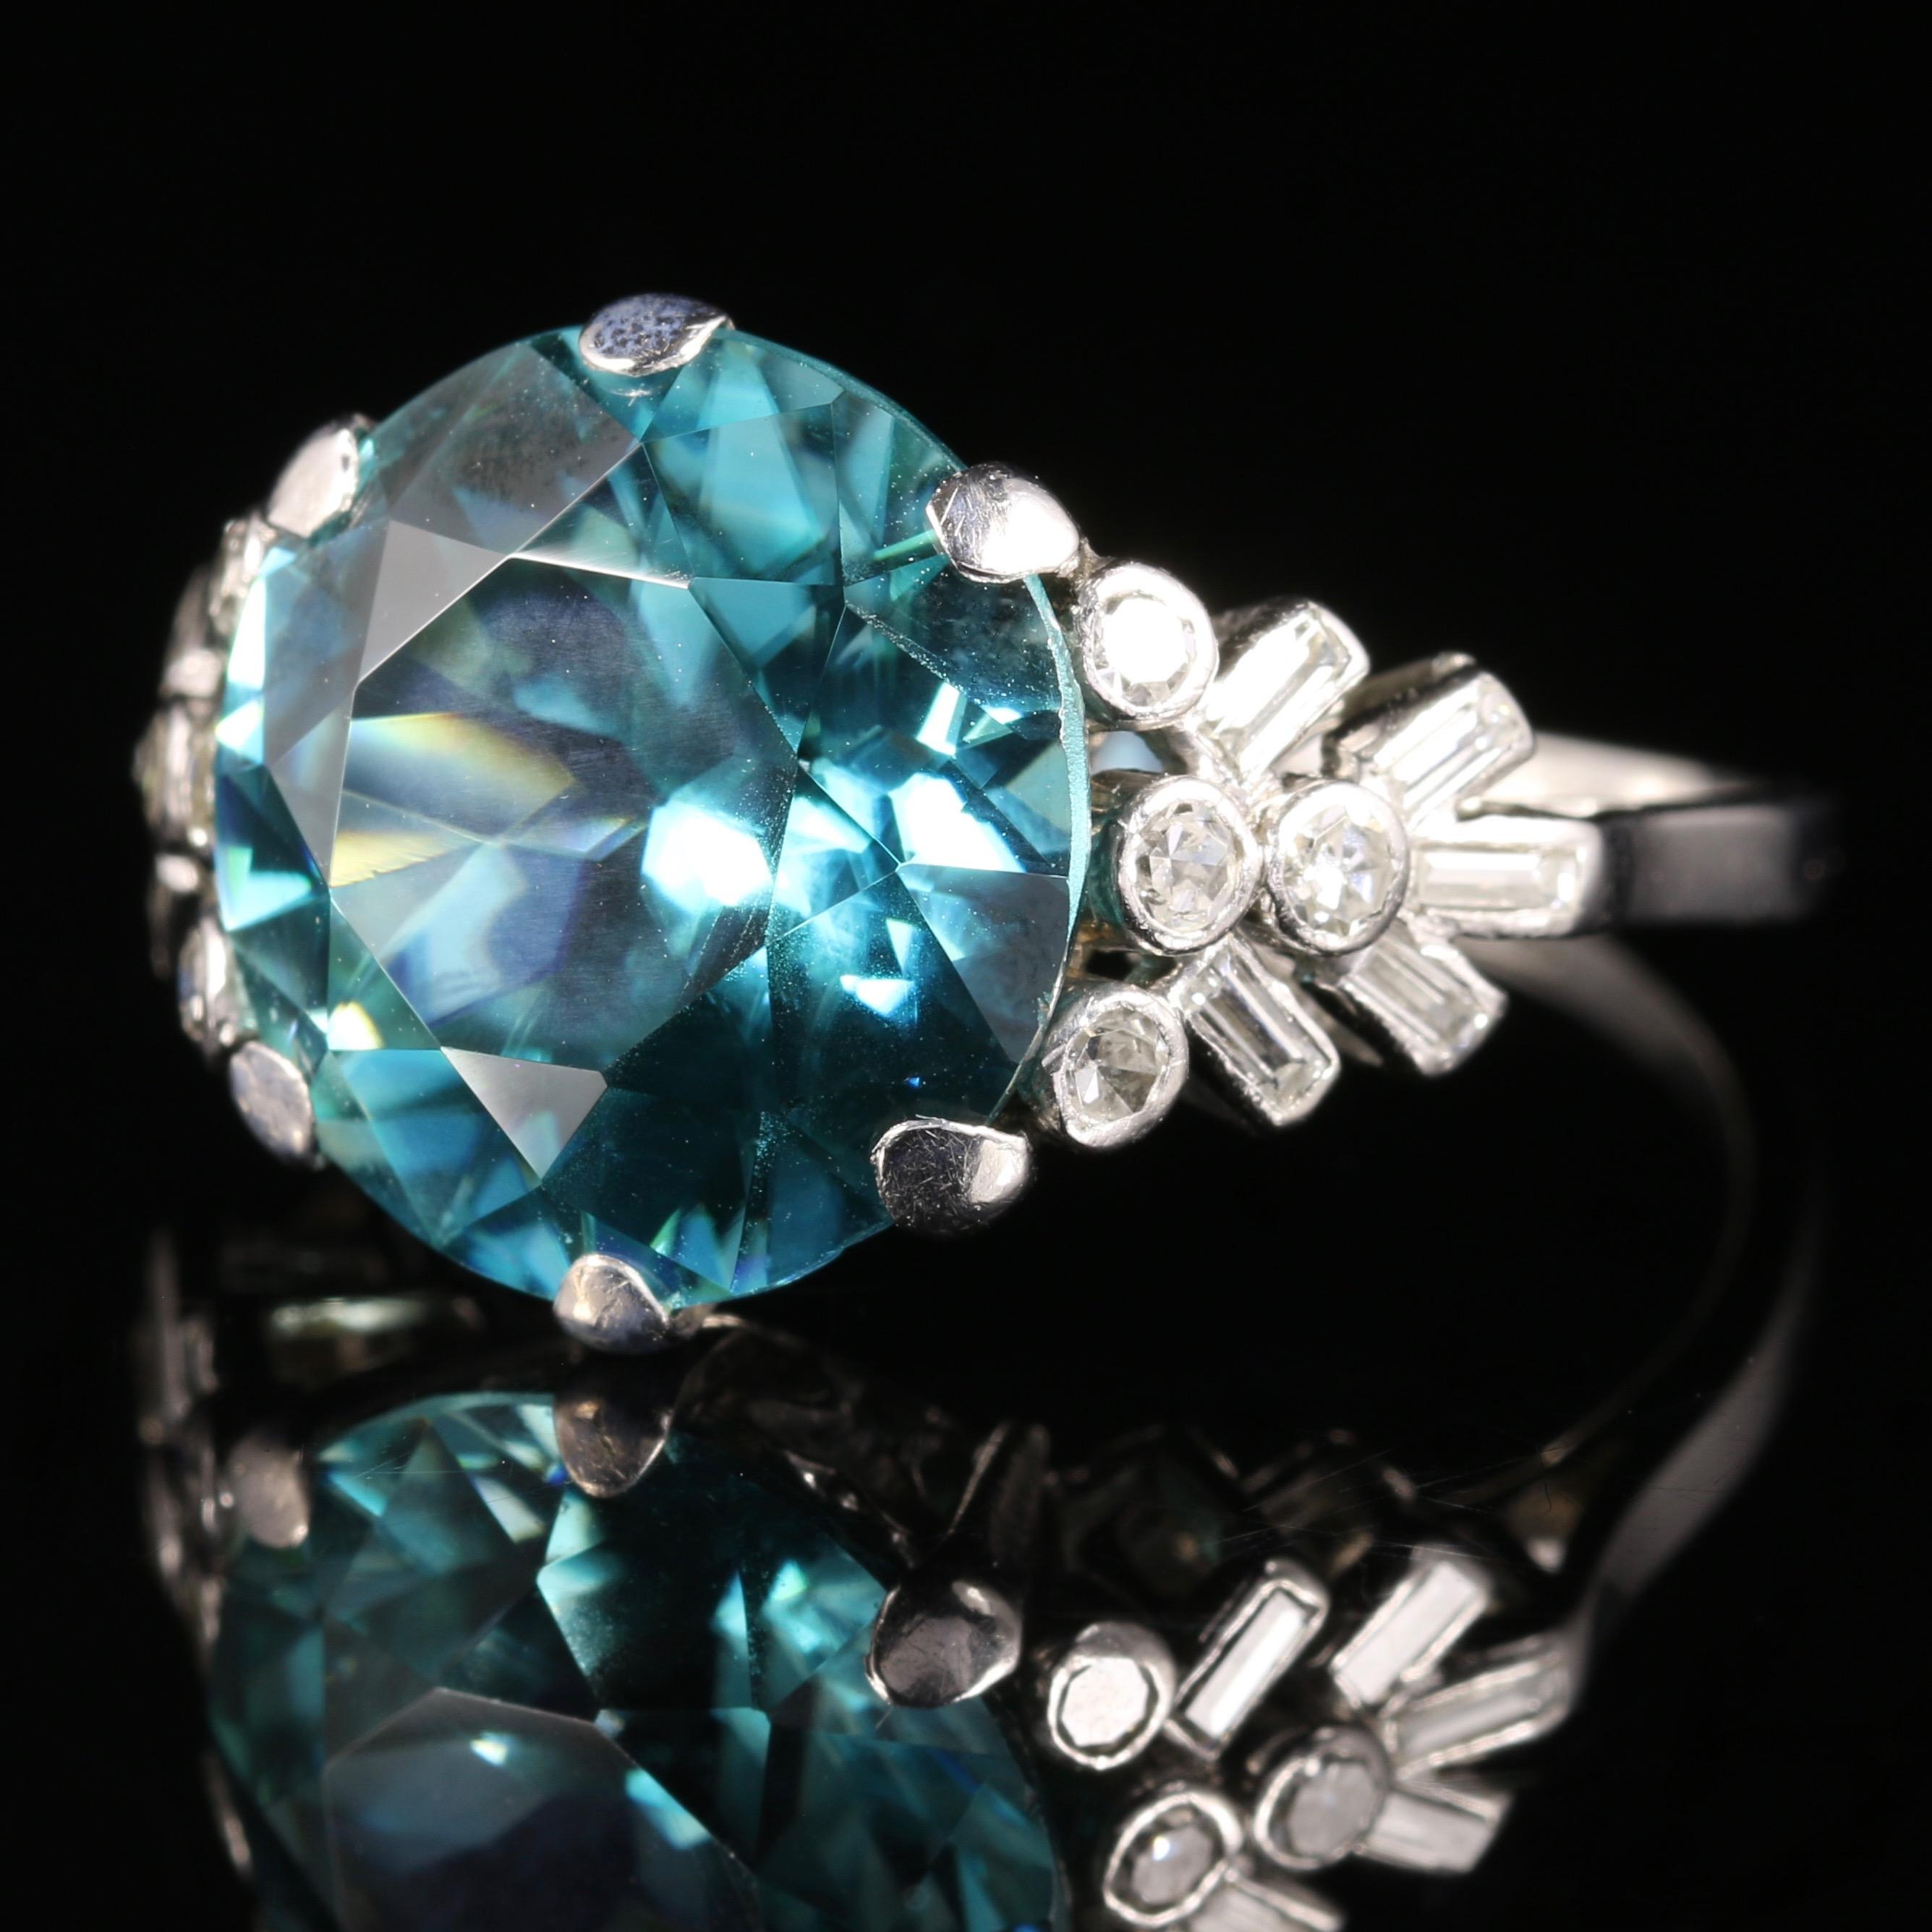 For more details please click continue reading down below...

This fabulous Antique Edwardian Blue Zircon ring is all set in Platinum, Circa 1915.

Set with a lovely large 8ct Blue Zircon, flanked with 9 old cut Diamonds and baguette cut Diamonds on